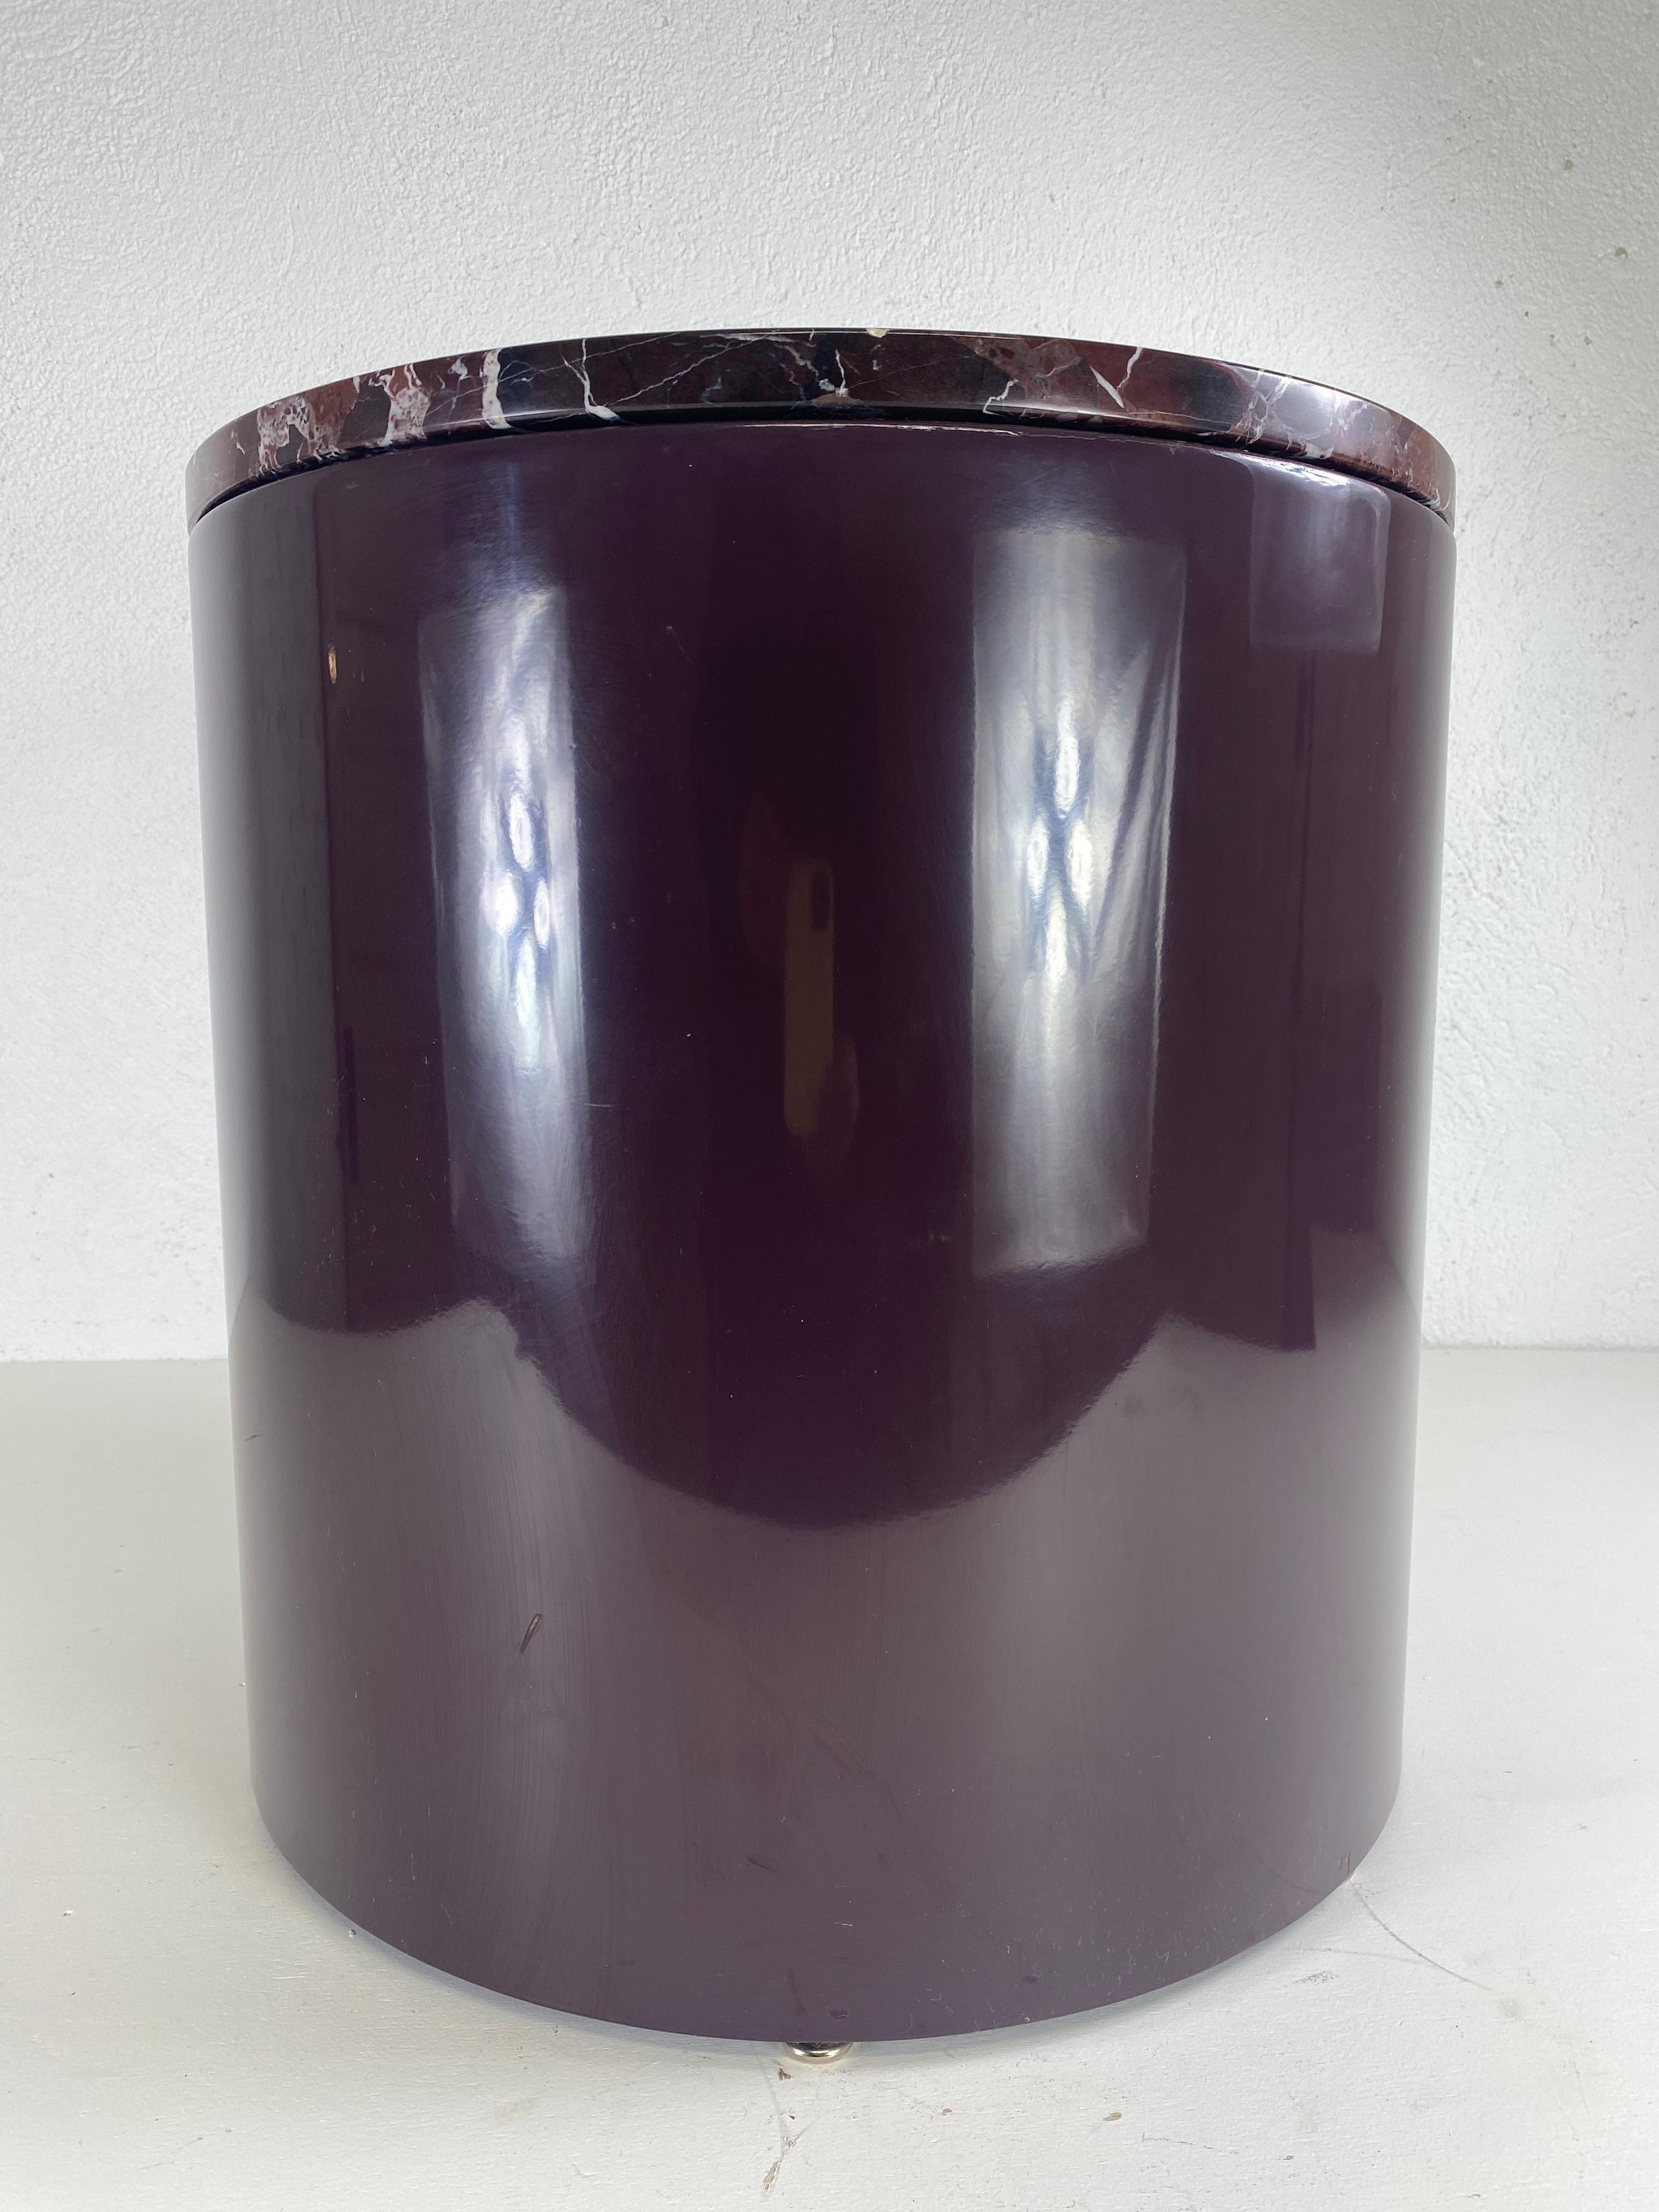 This is a mid century modern lacquered marble top pedestal or side table. This pedestal has a deep eggplant lacquered finish to the base with an elegant and black vein marble top. This pedestal table is American made circa 1970.